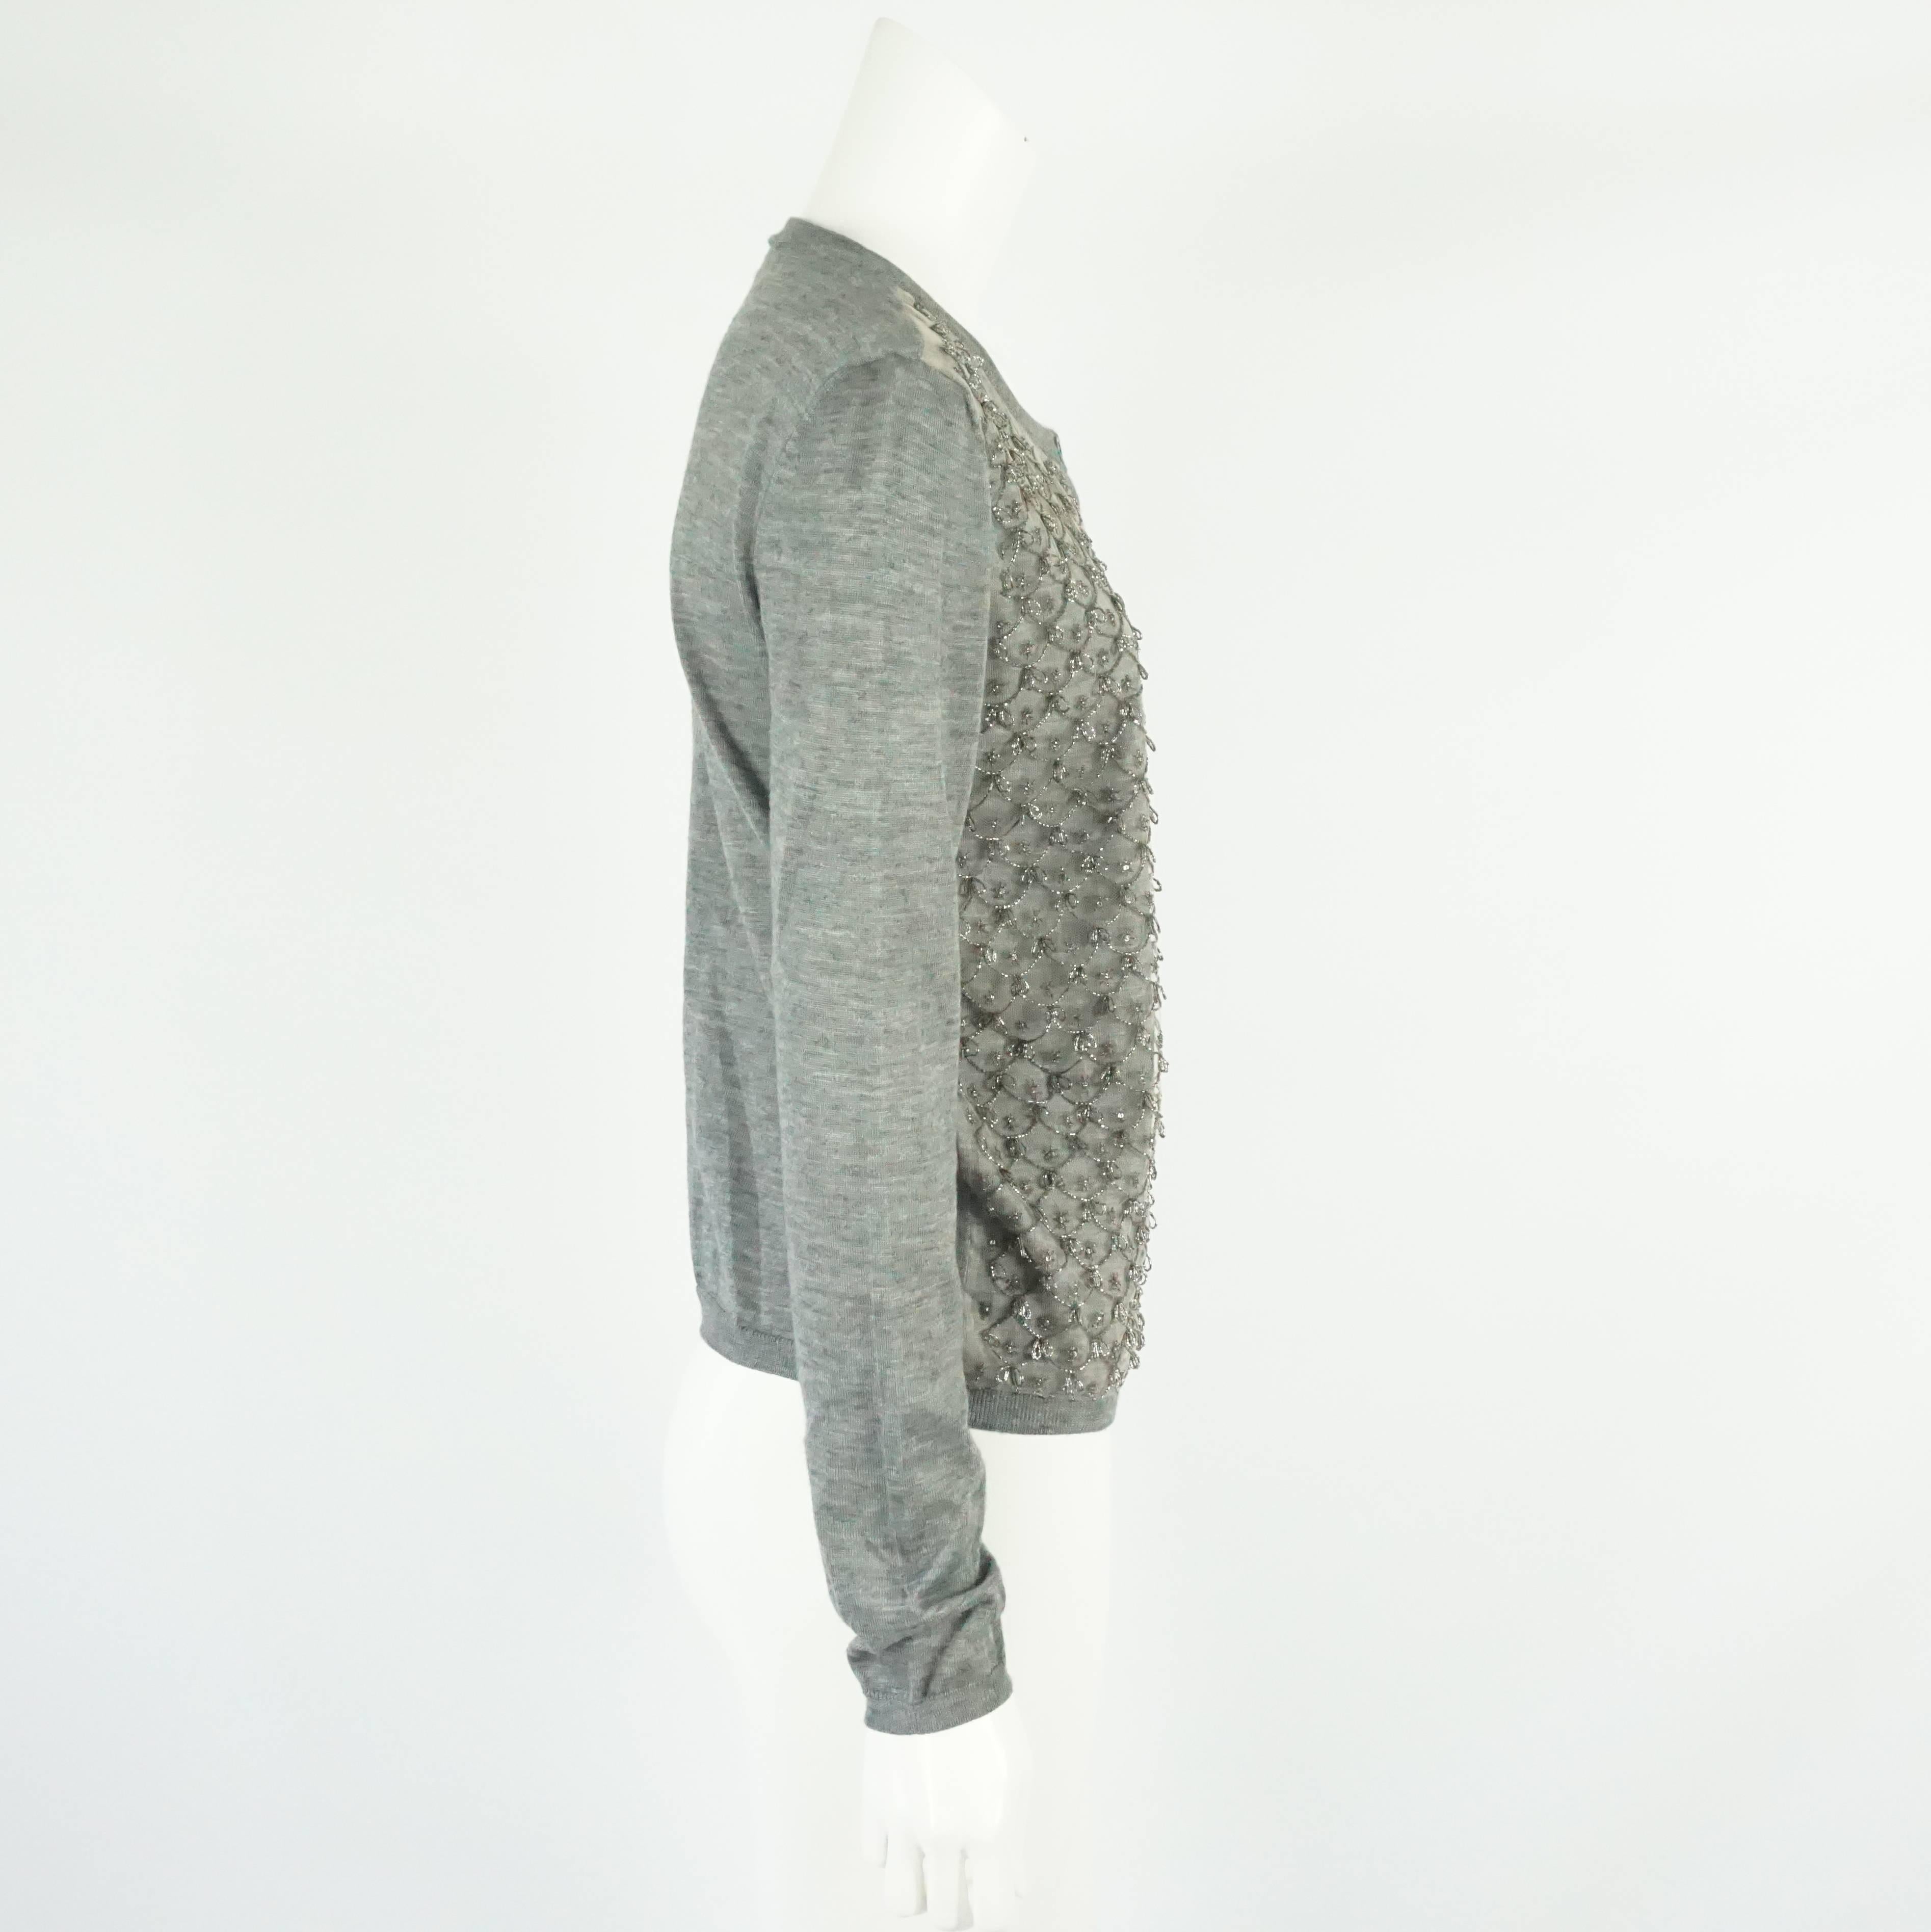 Valentino Gray Cotton-Knit Cardigan with Beaded Design - M. This beautiful and soft cardigan has a round neckline. The front of this cardigan has a mesh overlay with a scalloped beaded design, rhinestones, and beaded hanging loops. This cardigan is